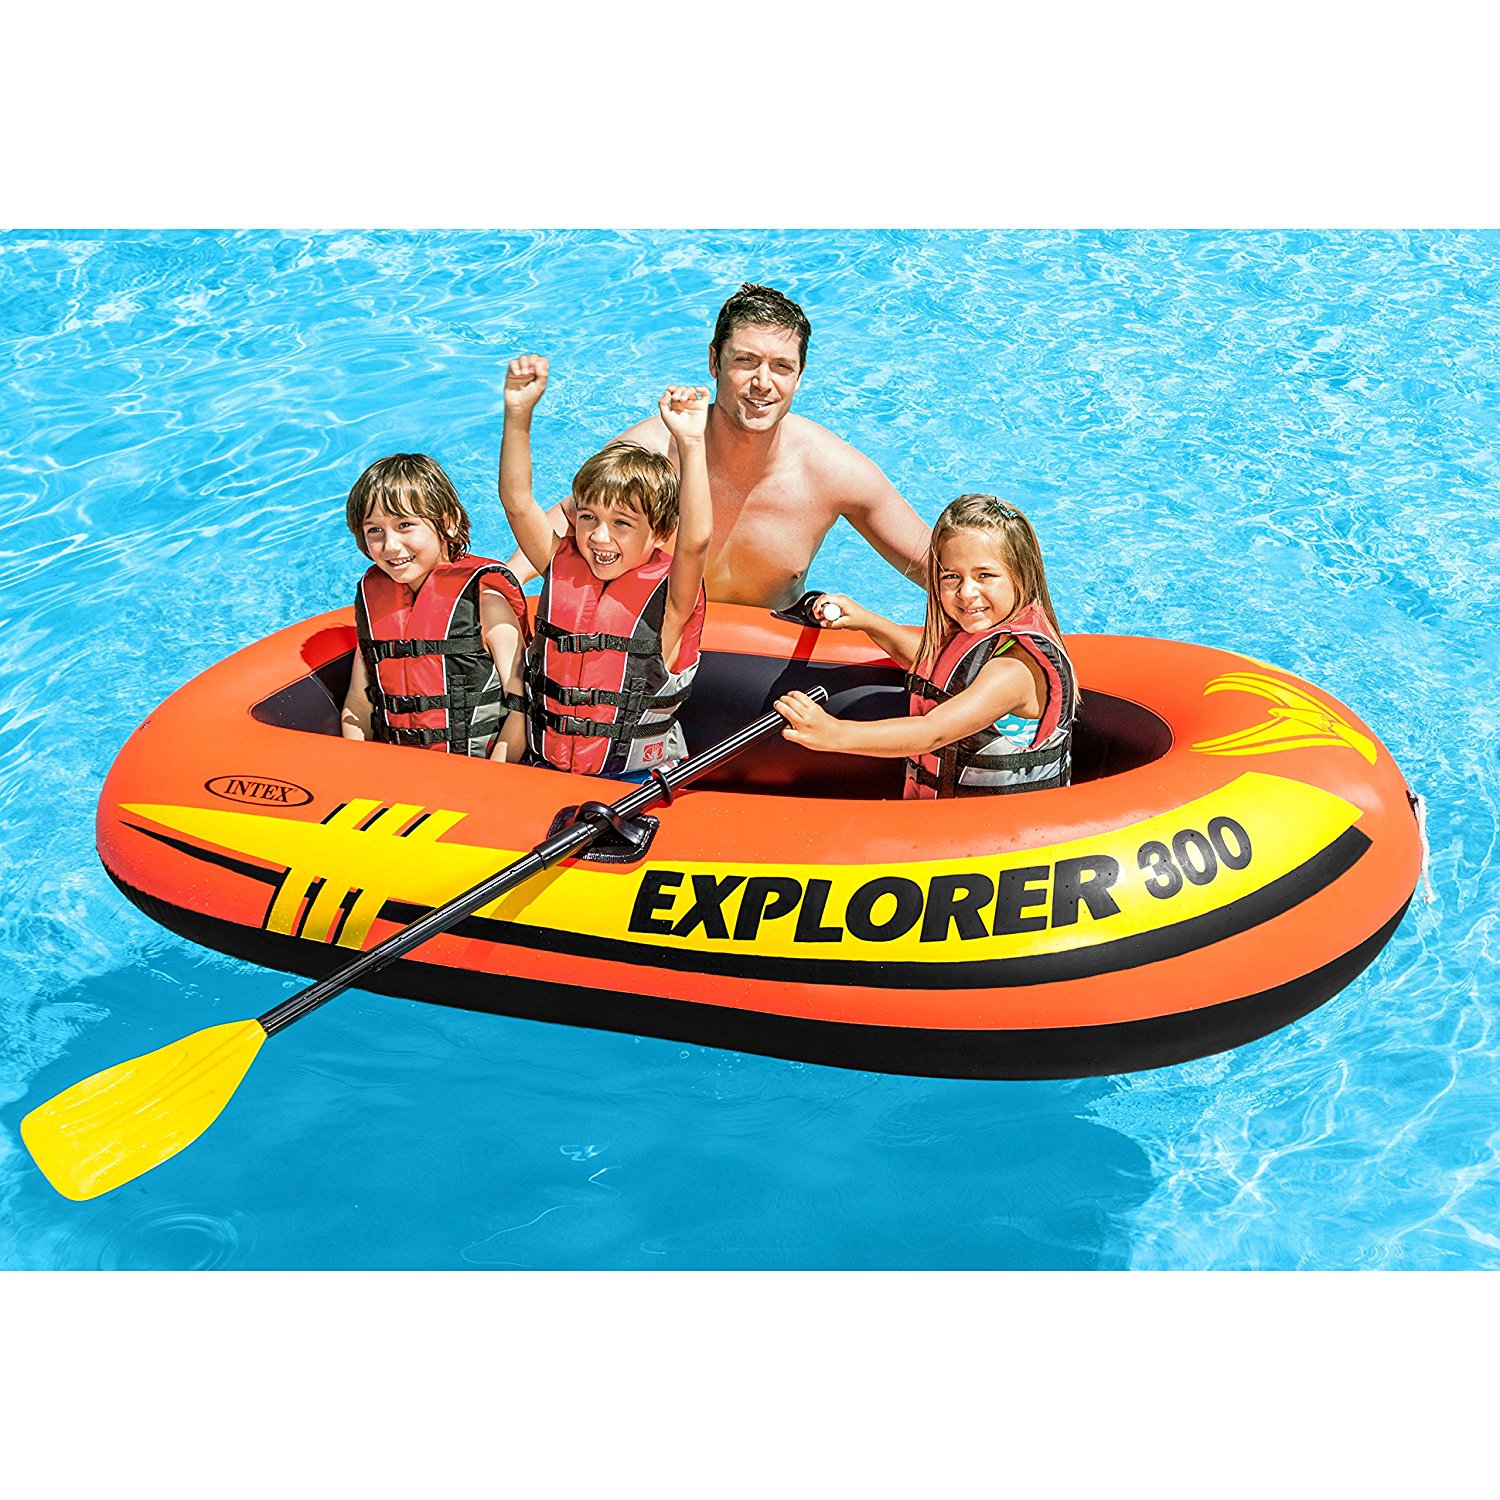 Today only: Intex Explorer 300 3-person inflatable boat set for $20